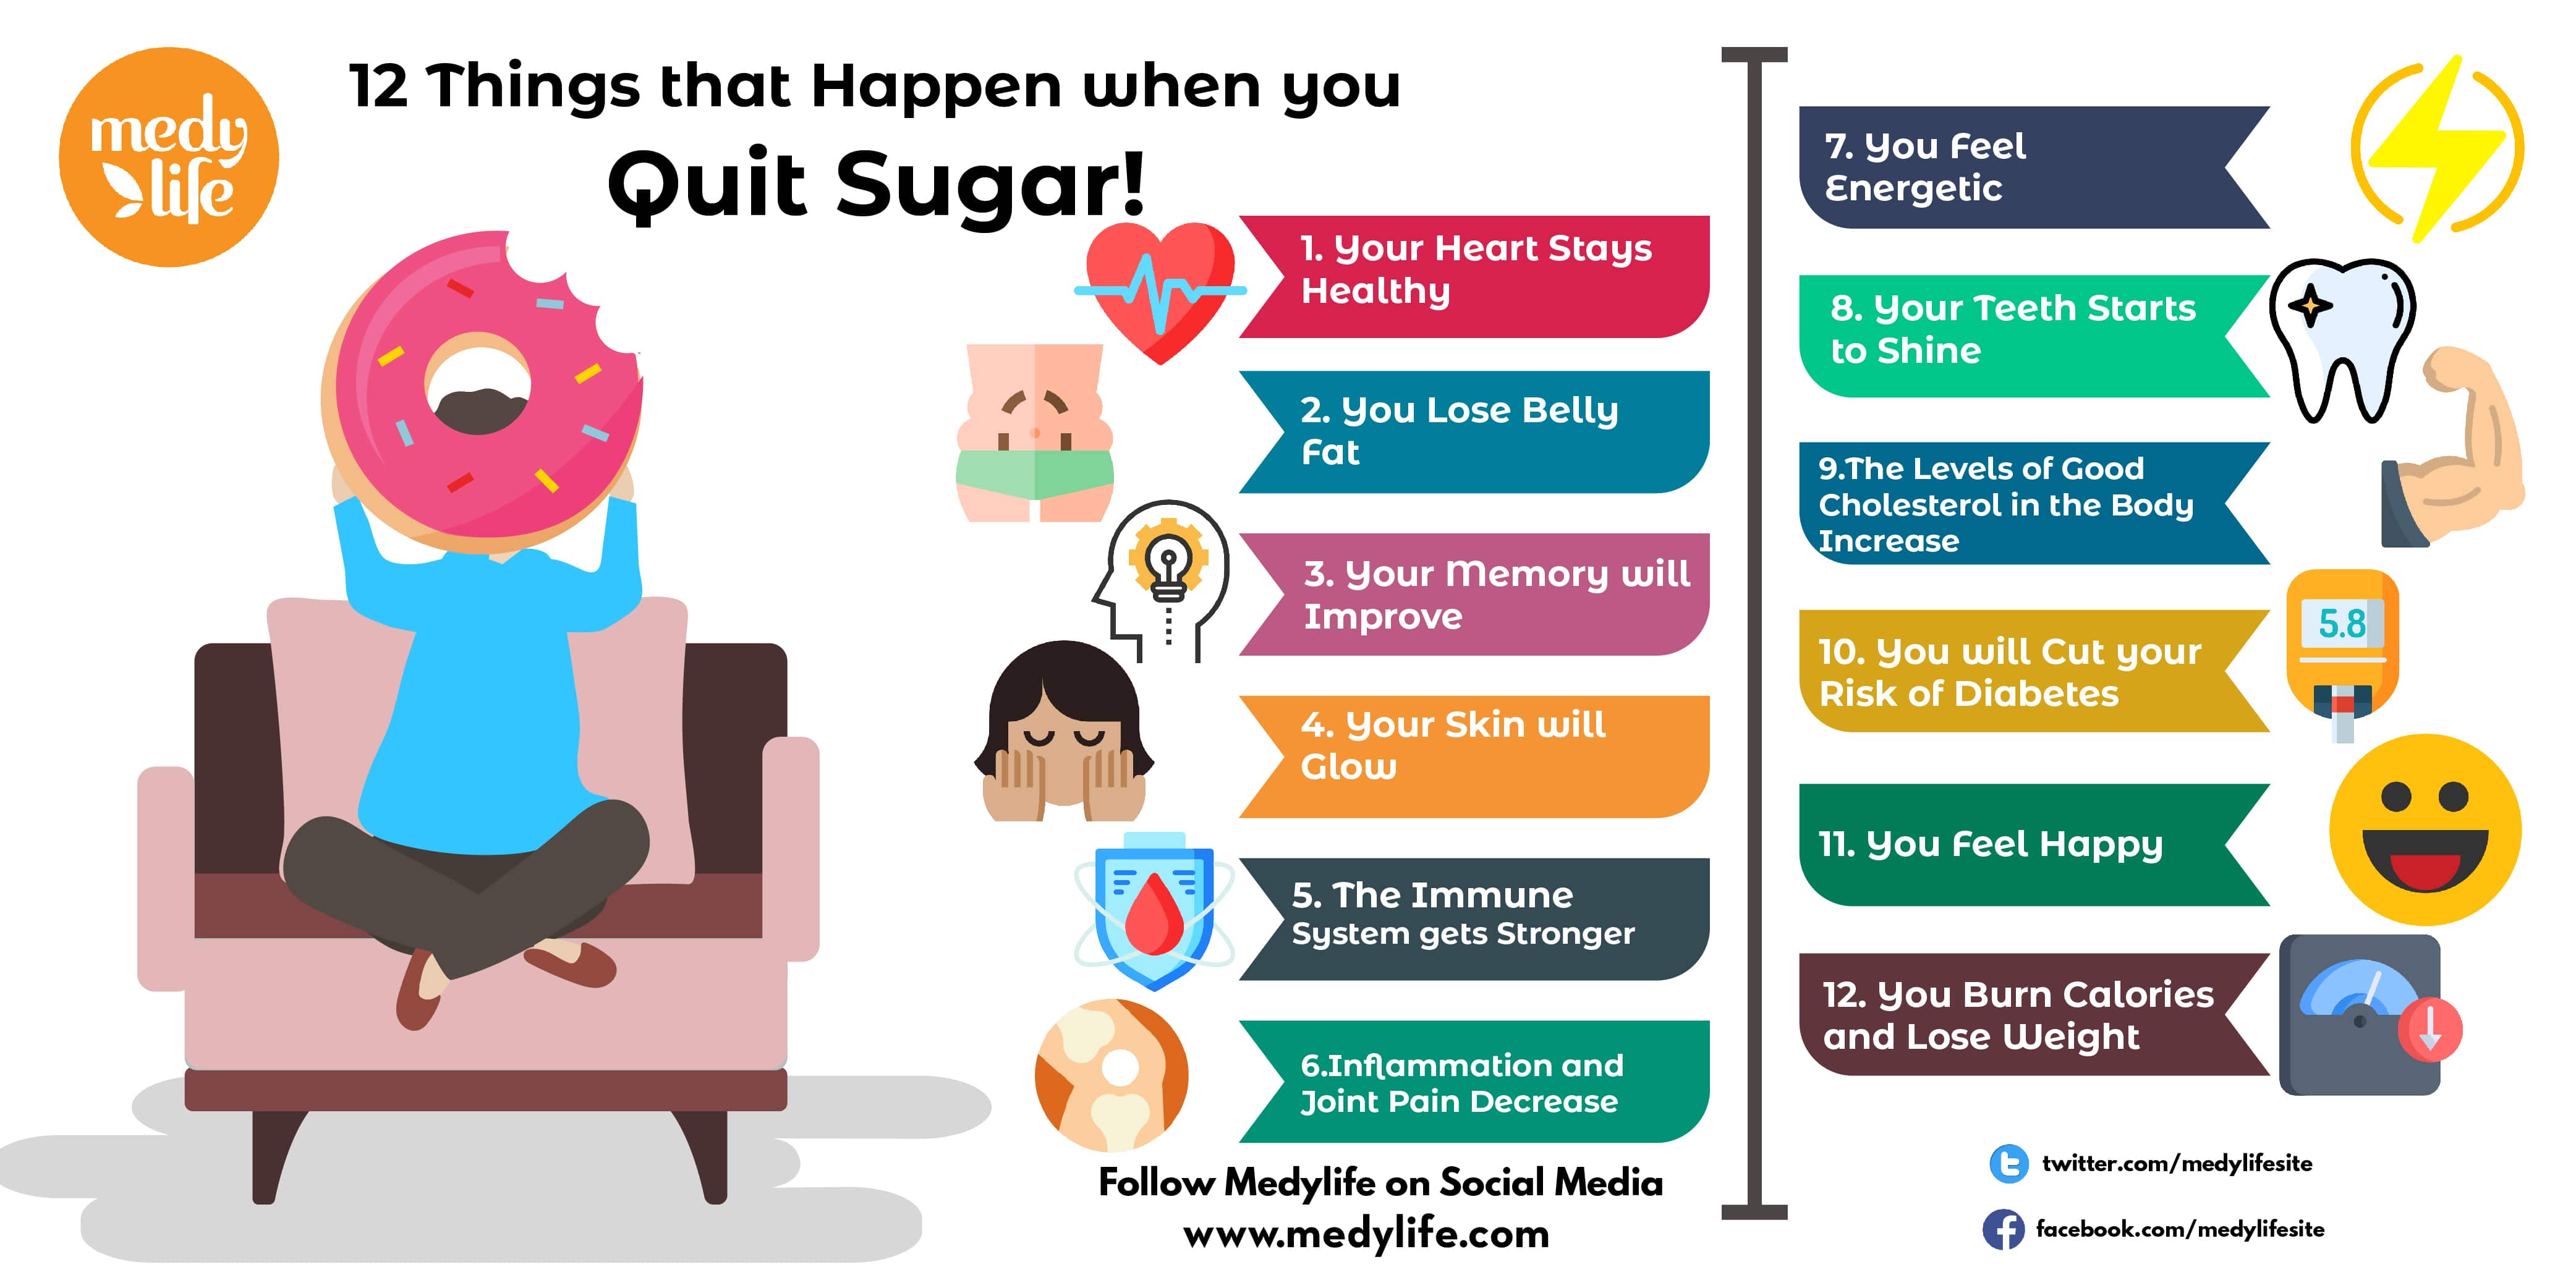 Can Quitting Sugar Cause Kidney Pain?